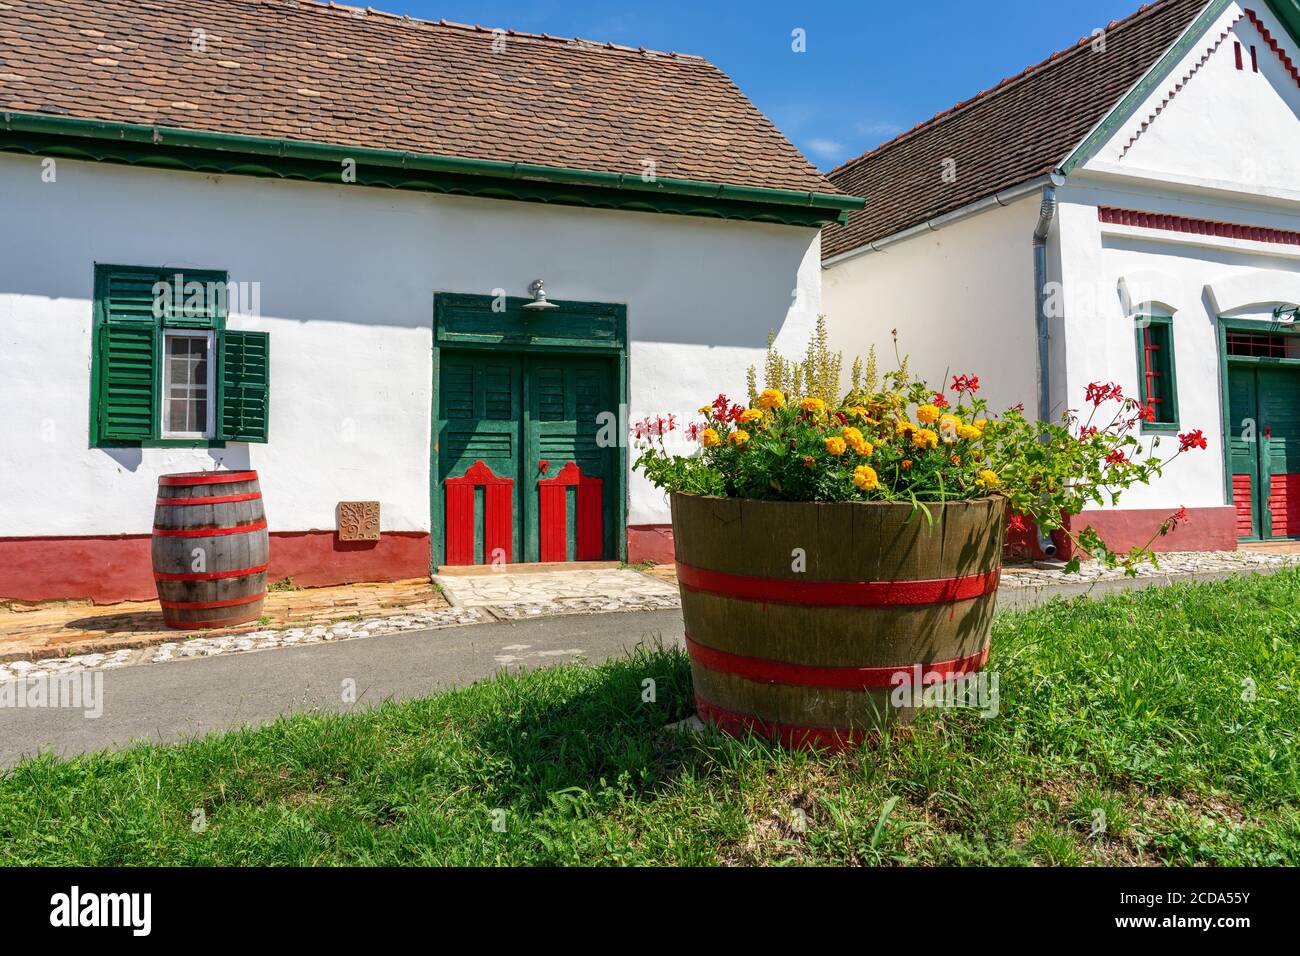 Famous hungarian gastro village Palkonya in Hungary street view with summer flowers Stock Photo